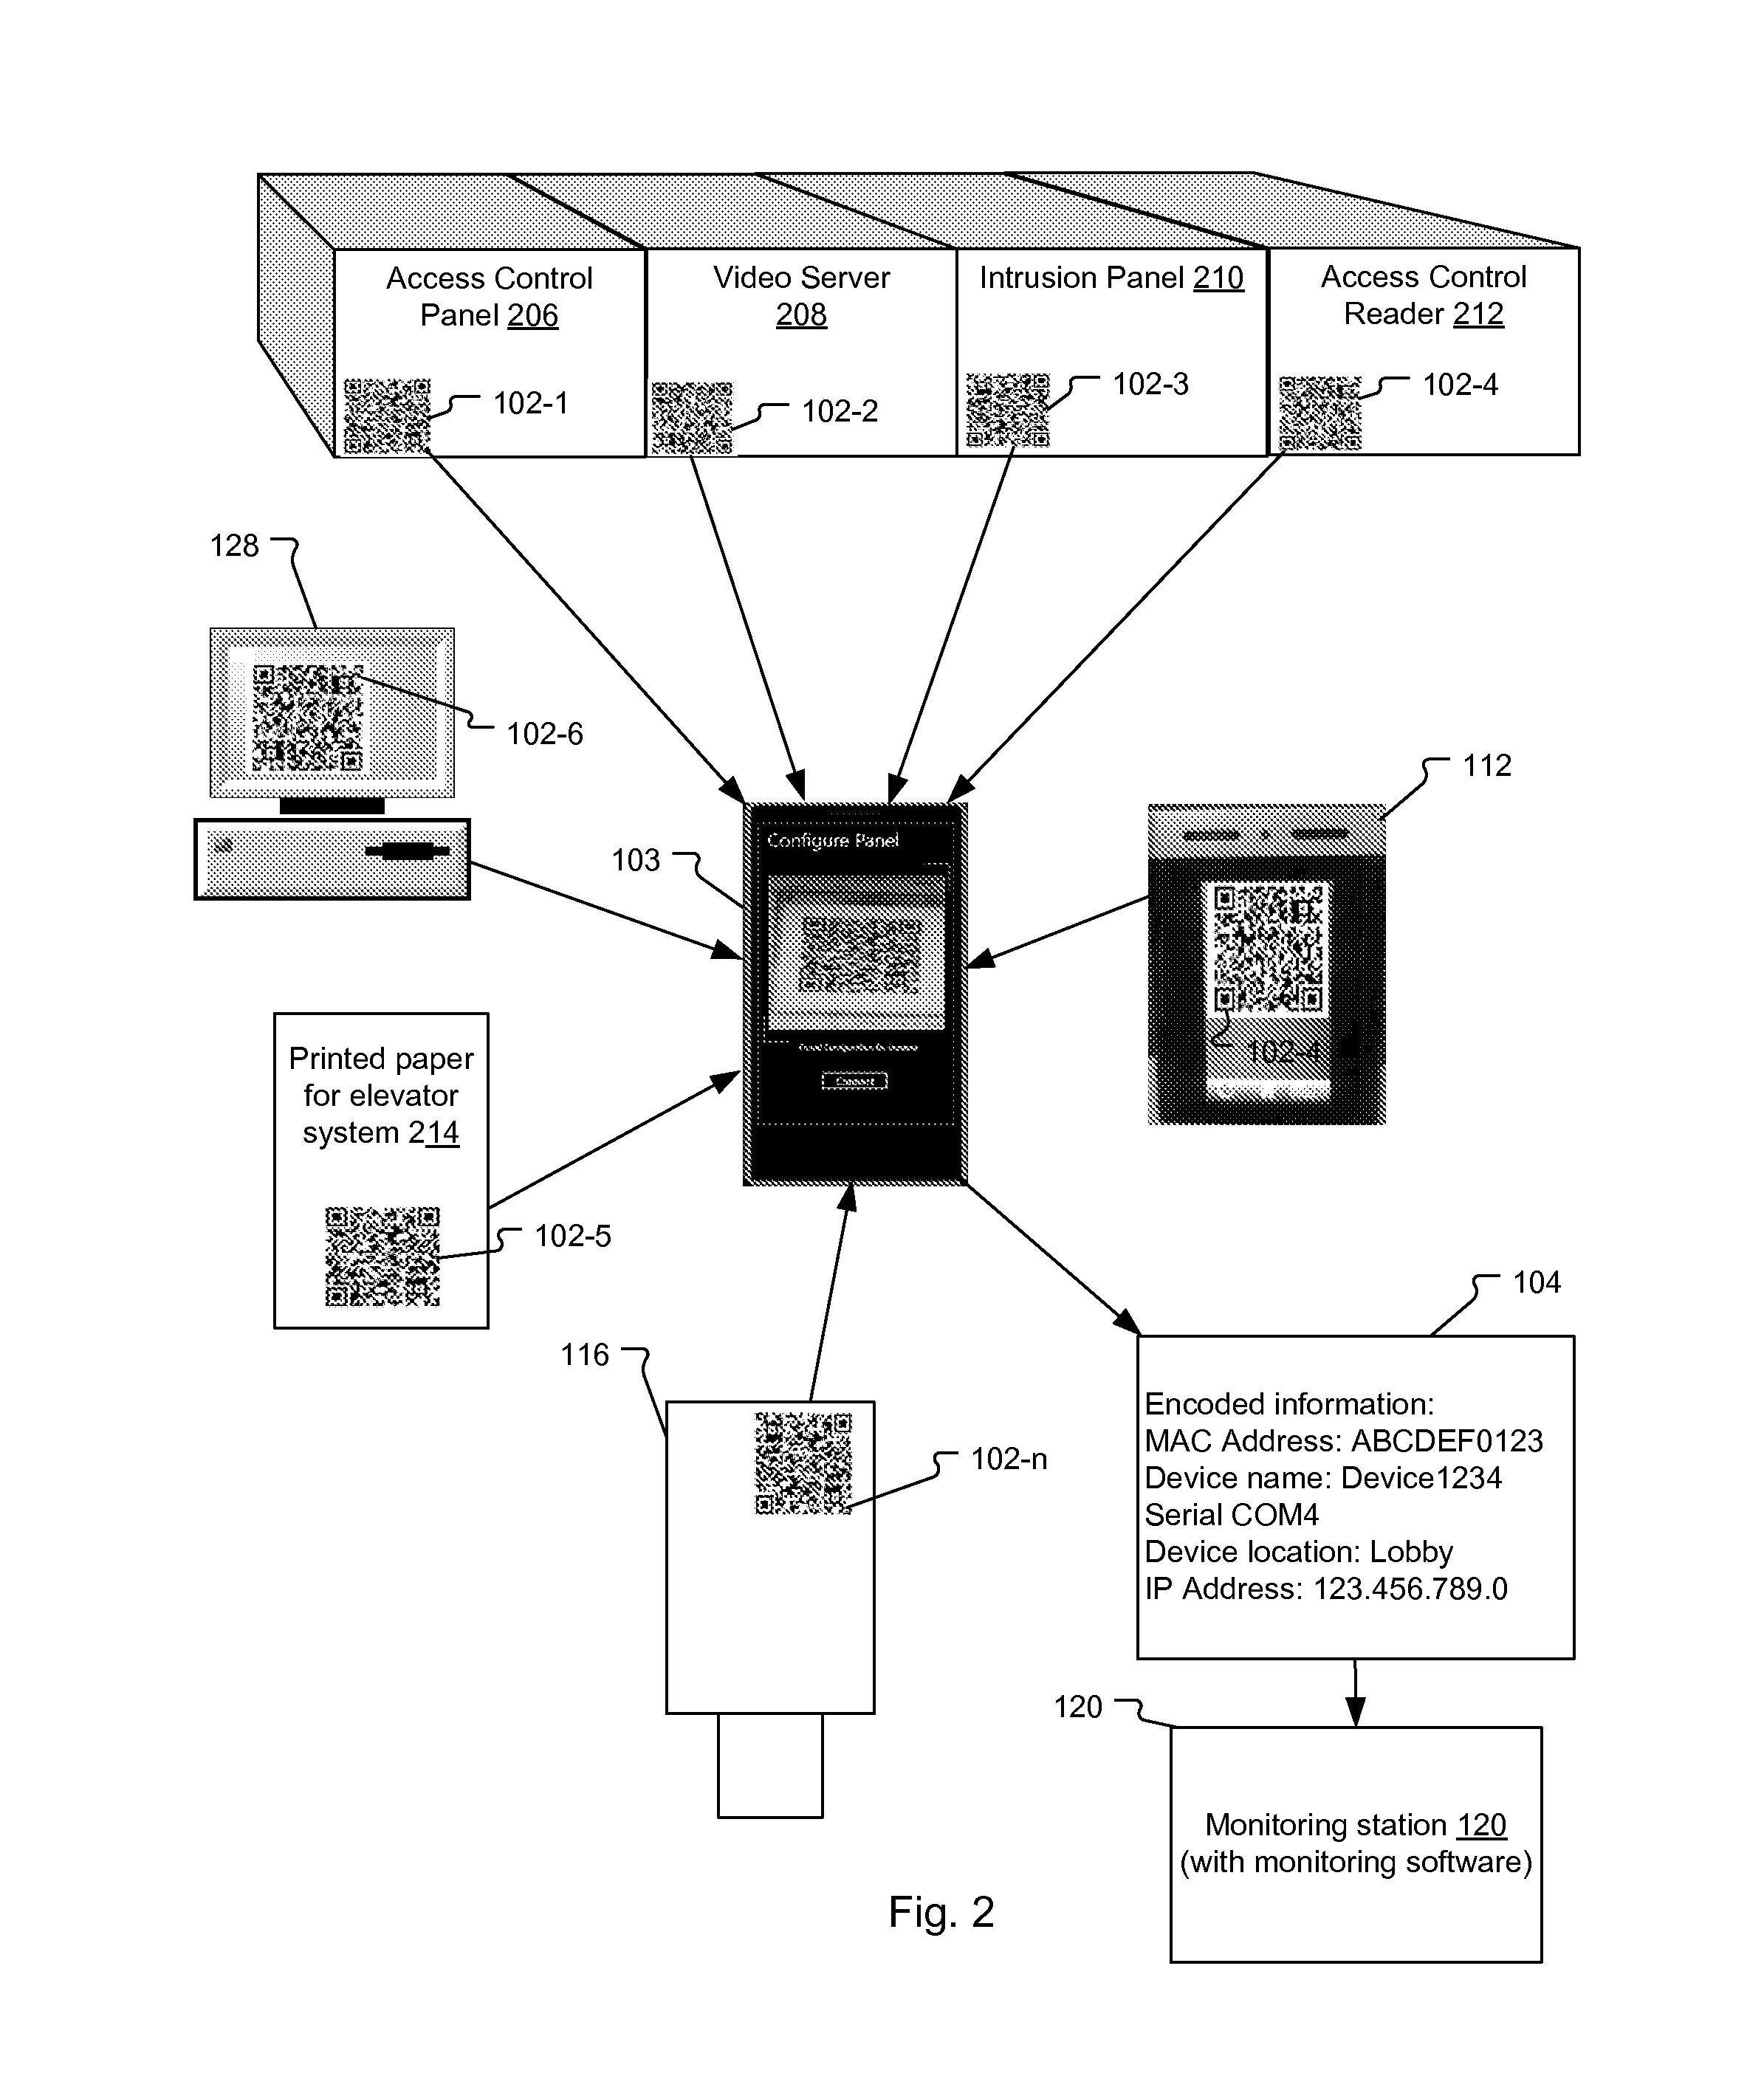 Configuration of Security Devices Using Spatially-Encoded Optical Machine-Readable Indicia